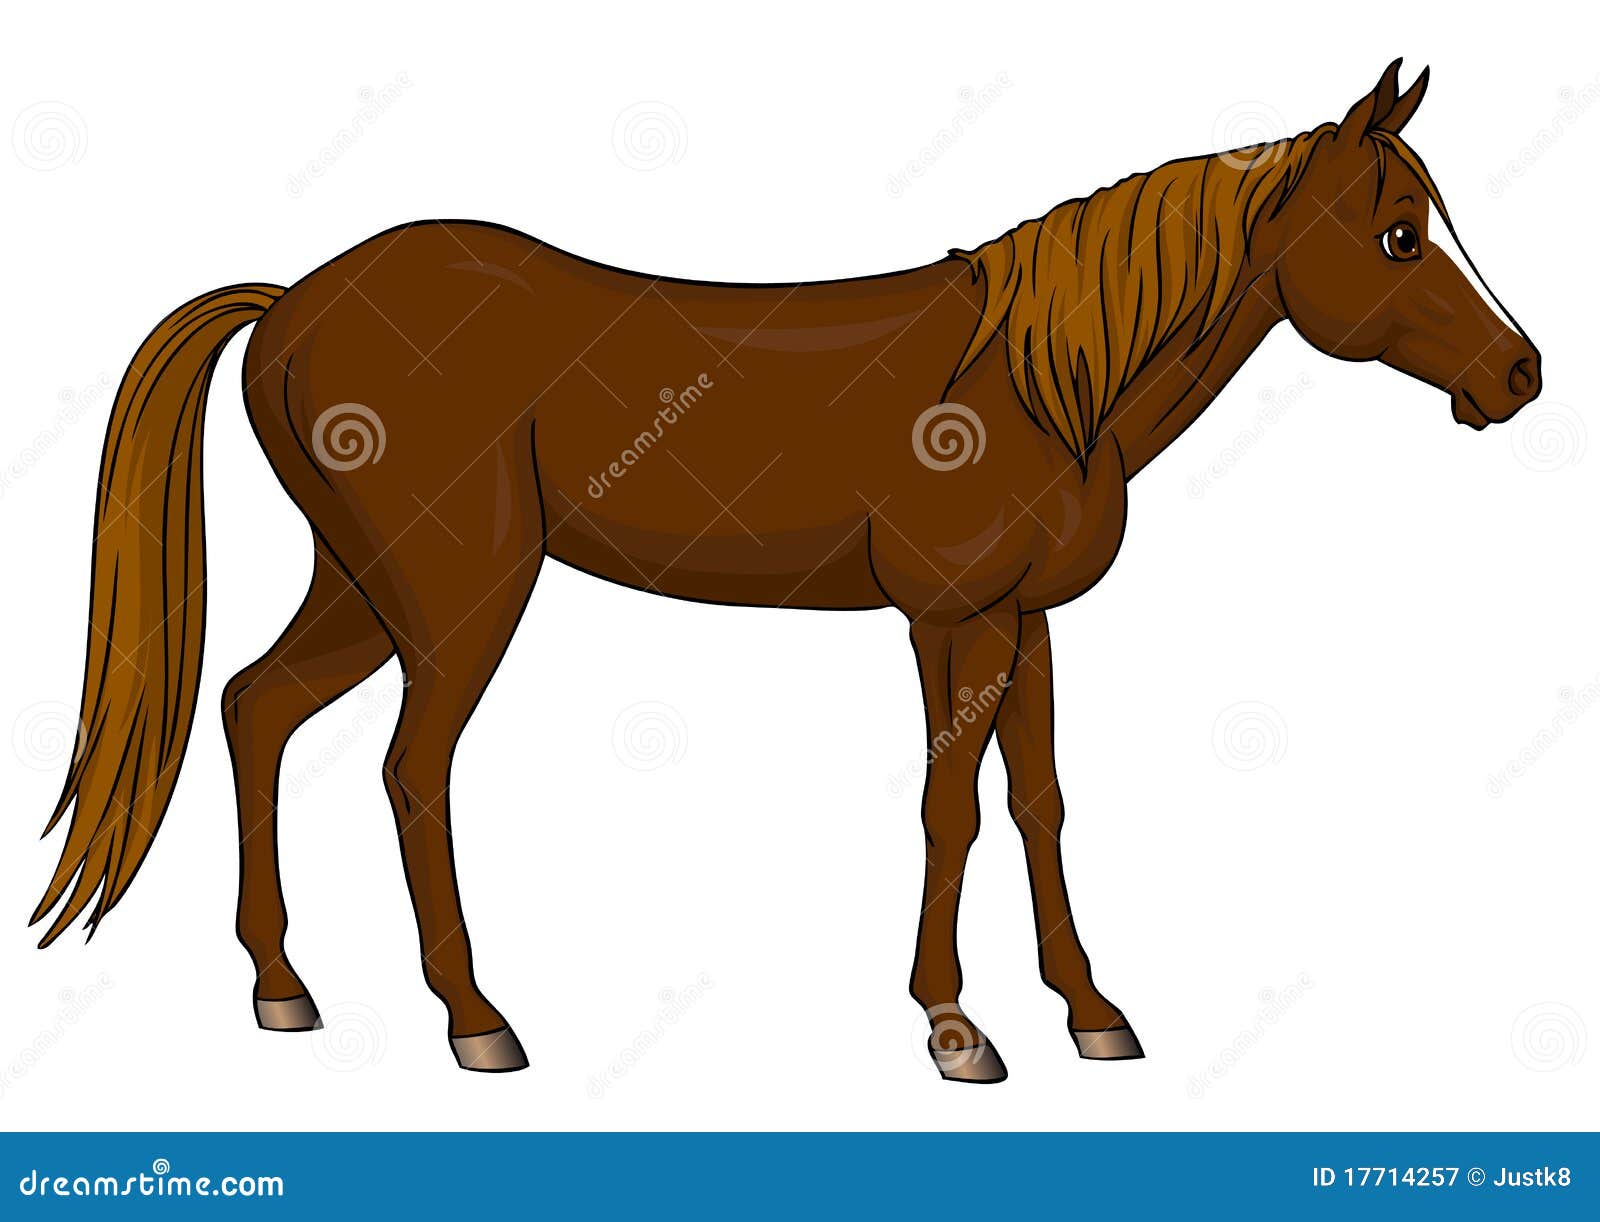 clipart of horse standing - photo #39